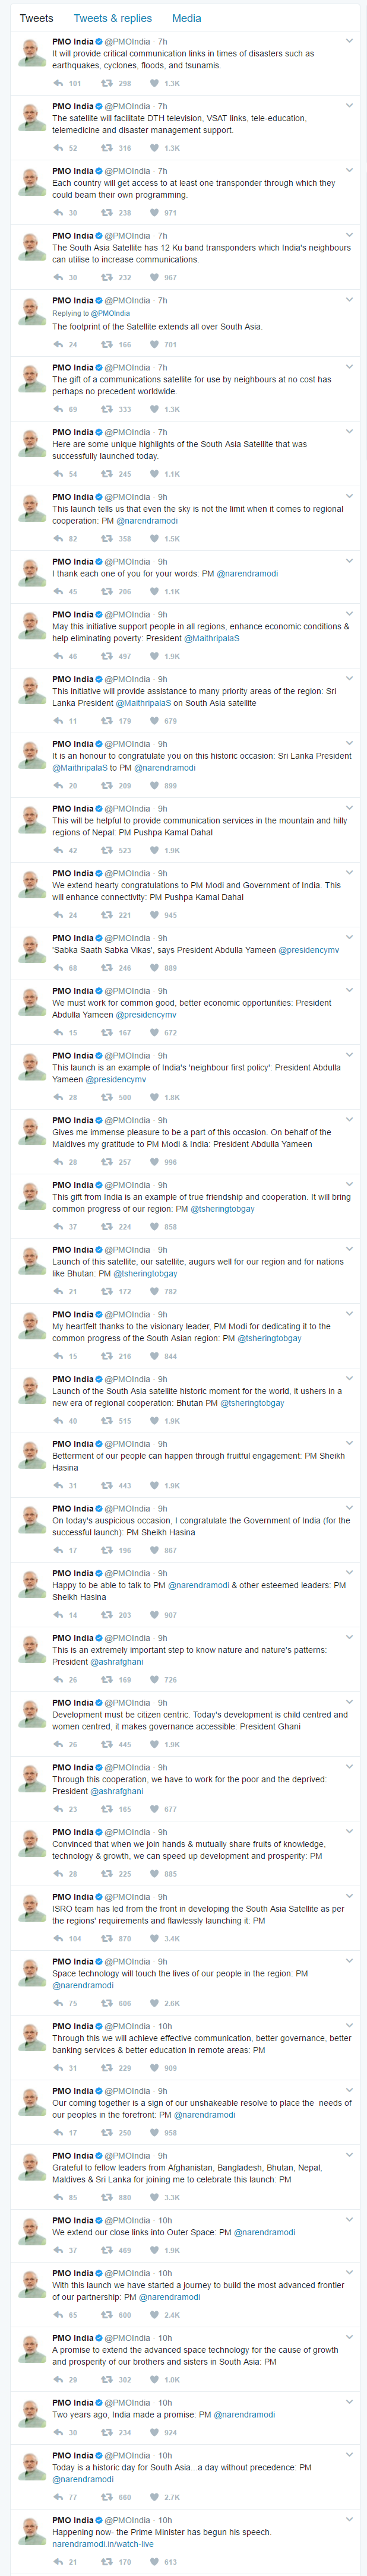 Tweets from PMO